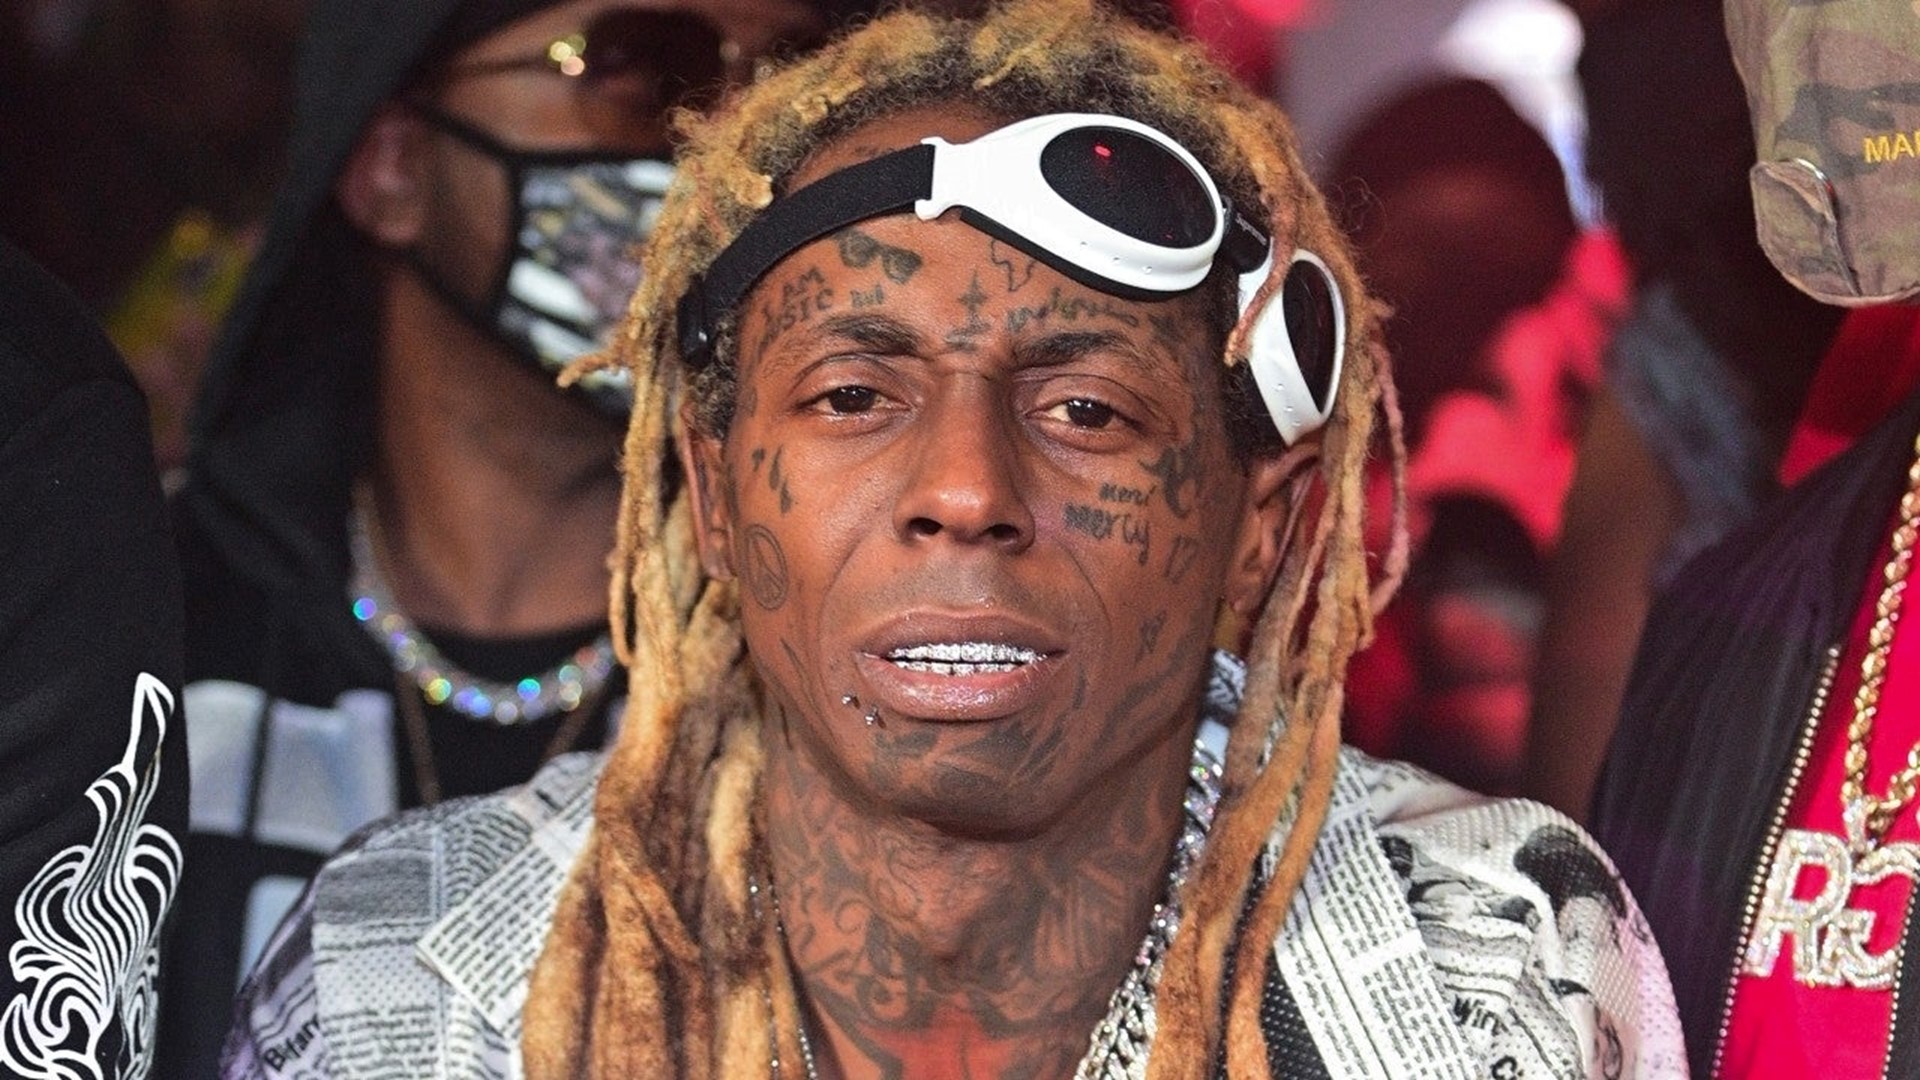 Lil Wayne Emotionally Details Suicide Attempt at Age 12